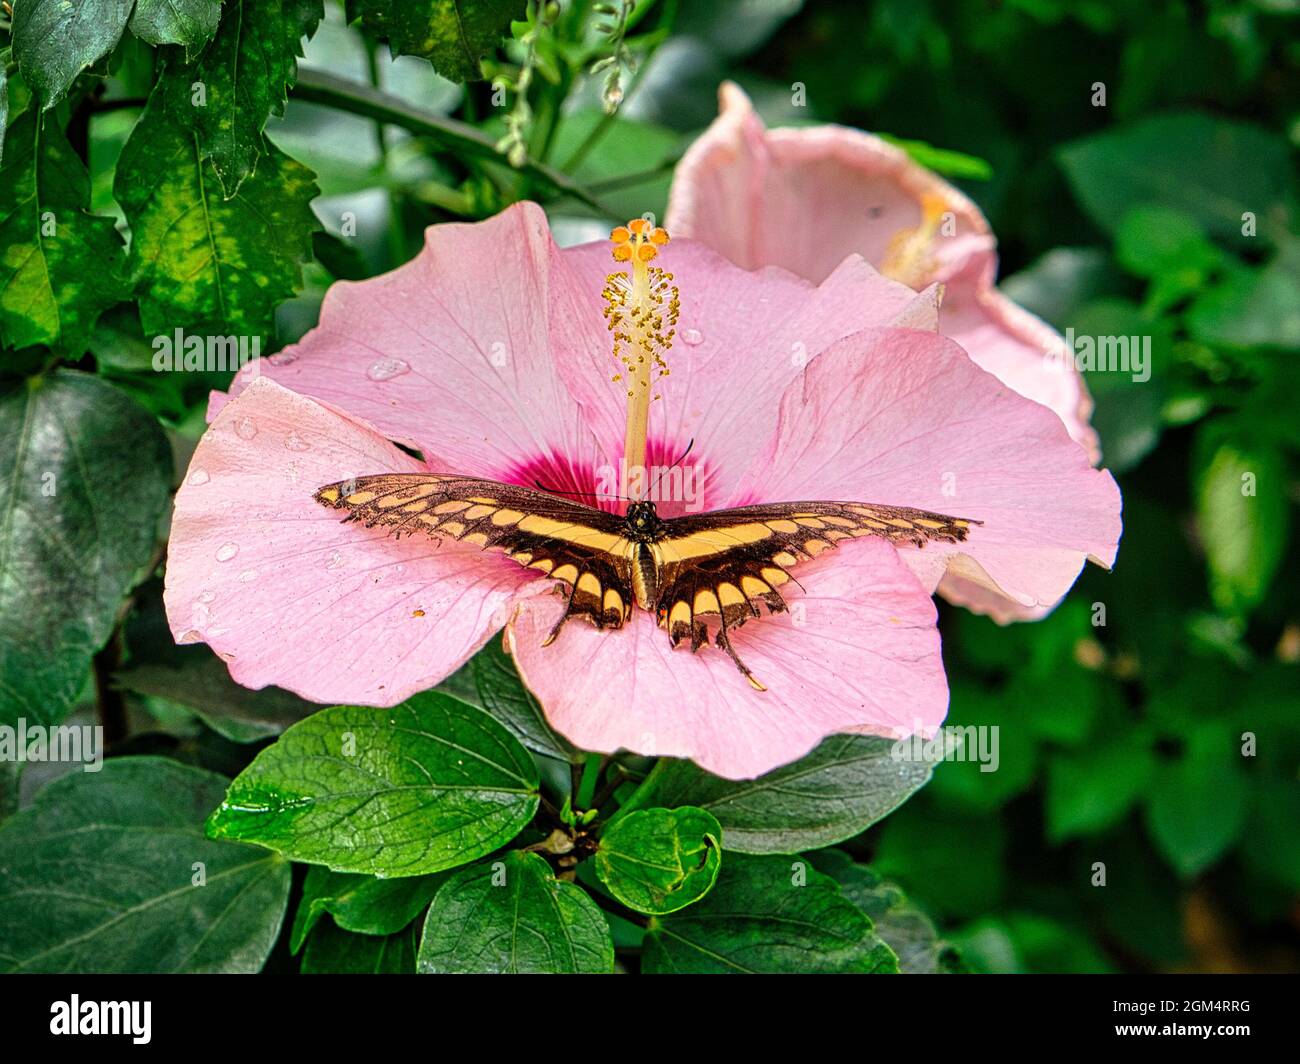 colorful butterfly on a leaf, flower. elegant and delicate. colorful, fragile, and dreamlike beauty Stock Photo